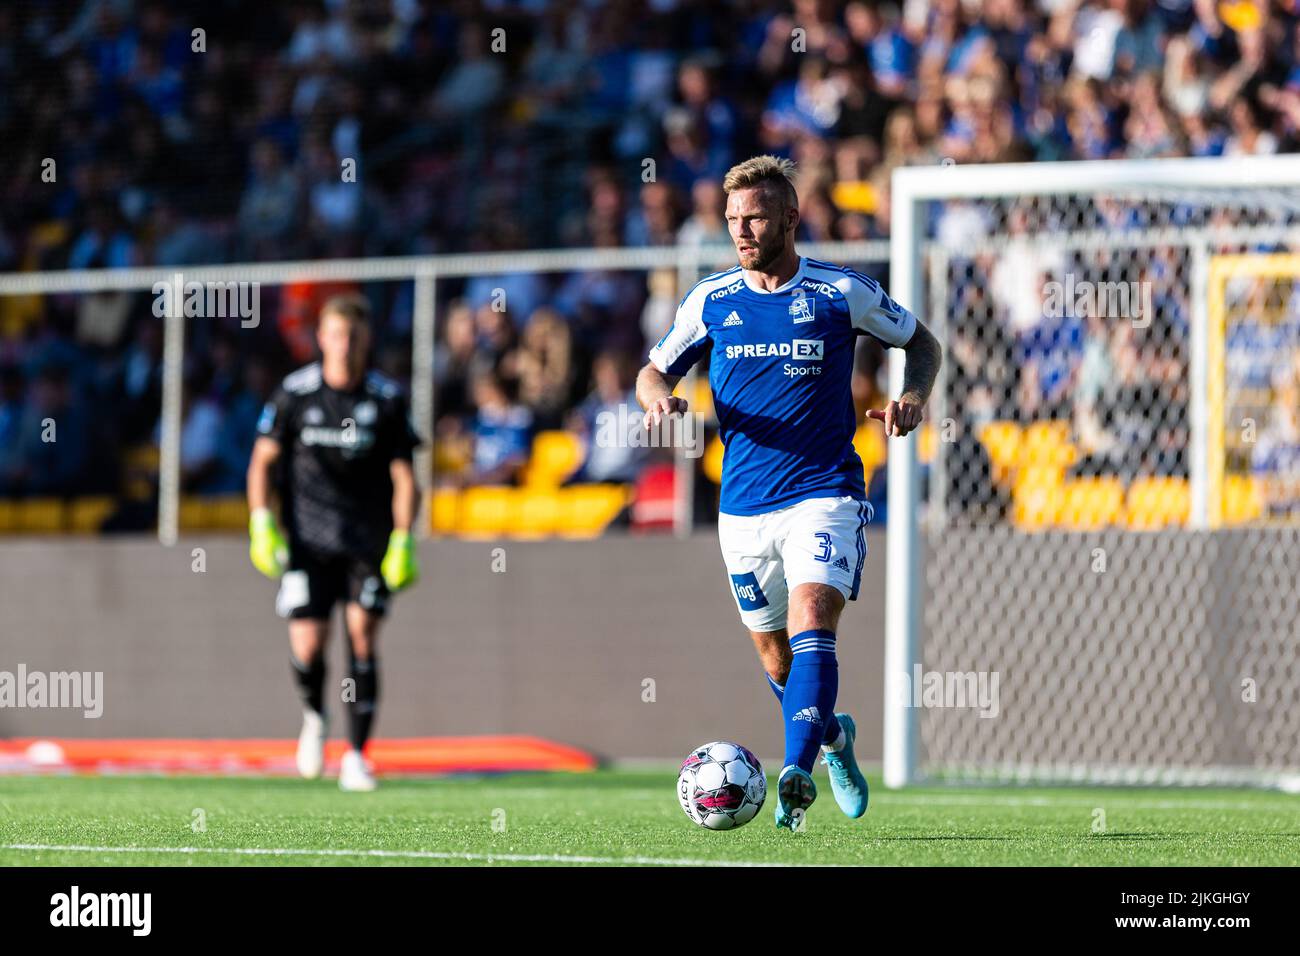 Farum, Denmark. 01st Aug, 2022. Brian Hamalainen (3) of Lyngby Boldklub  seen during the 3F Superliga match between FC Nordsjaelland and Lyngby  Boldklub at Right to Dream Park in Farum. (Photo Credit: